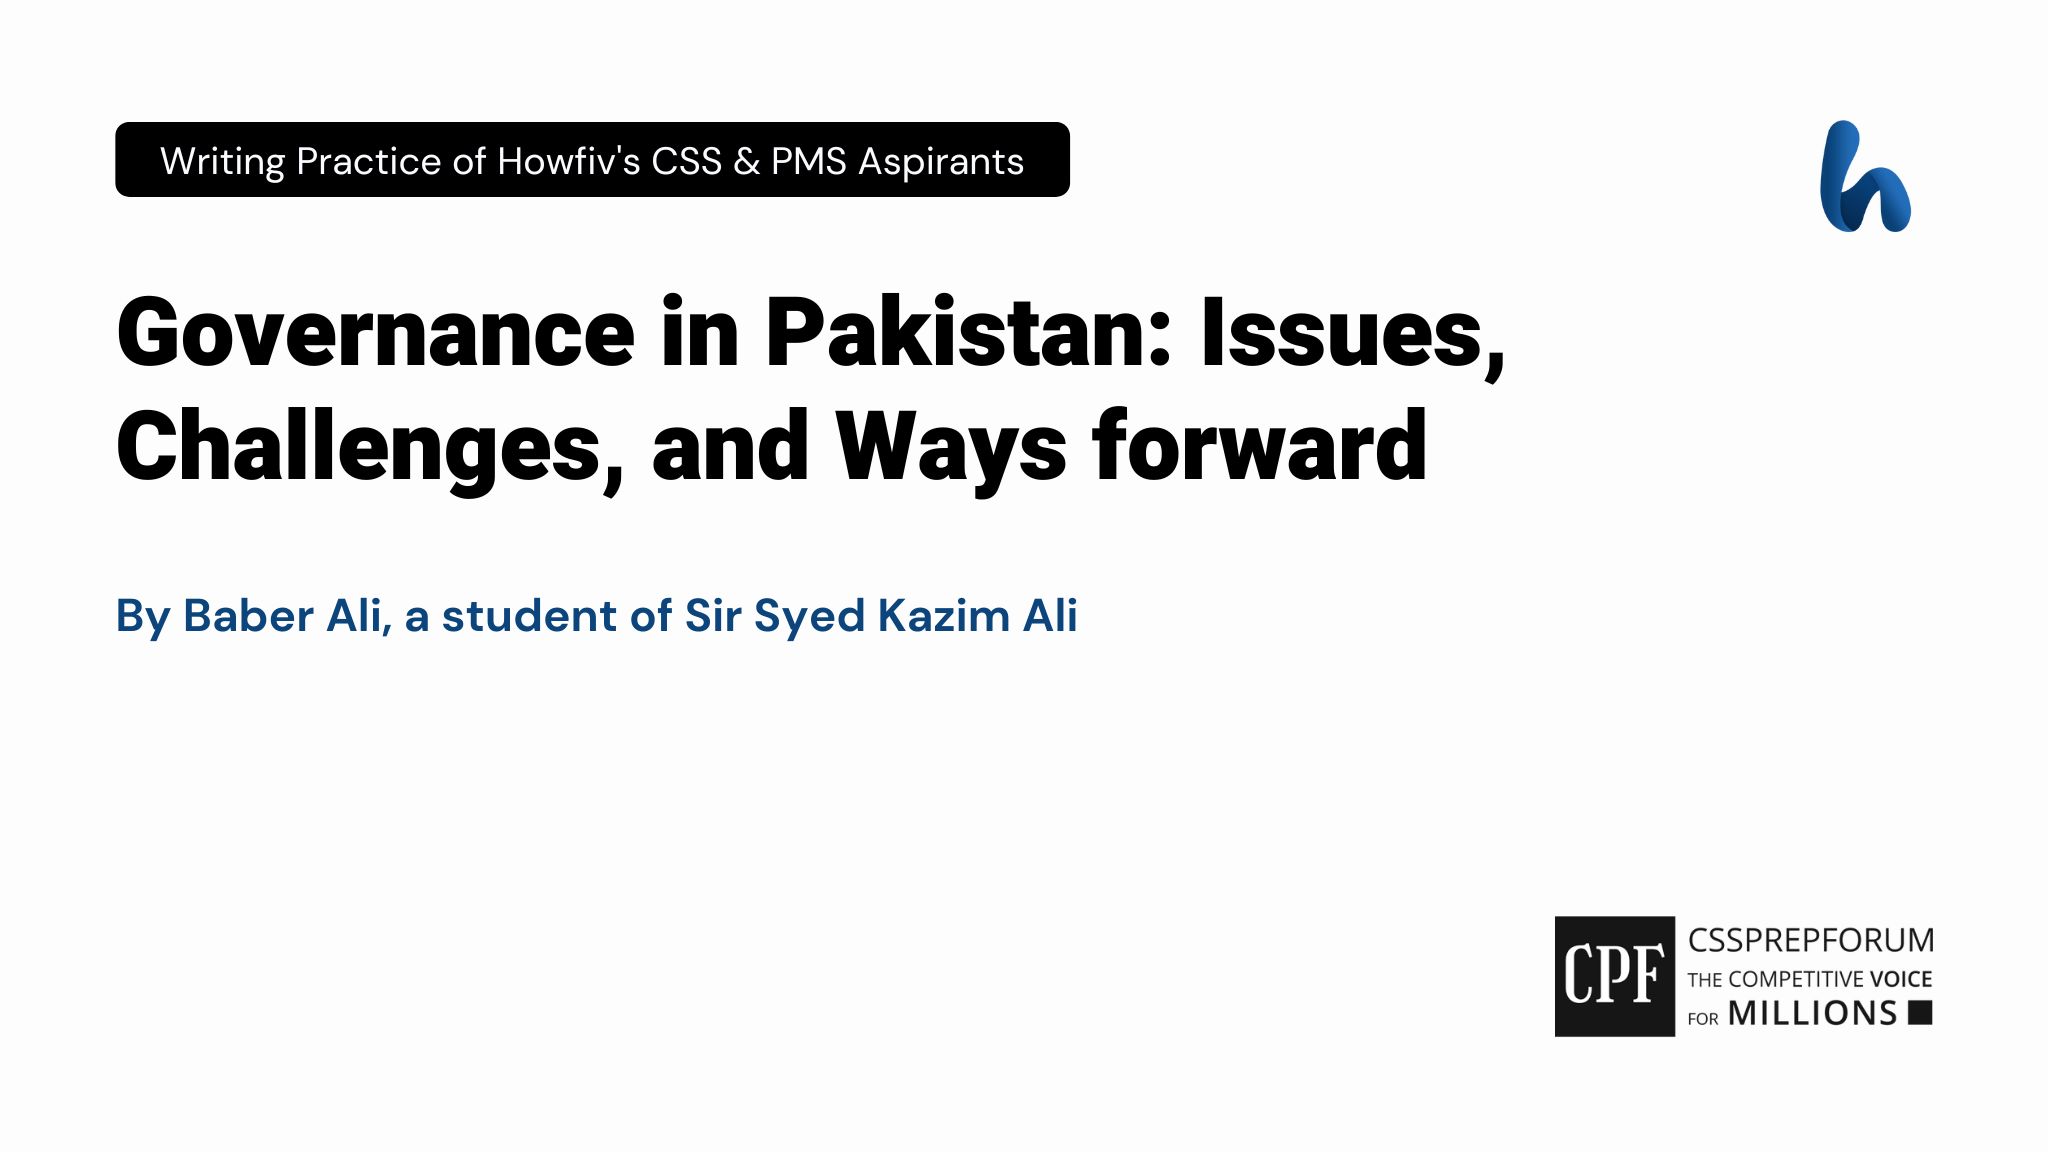 Governance in Pakistan: Issues, Challenges, and Ways forward